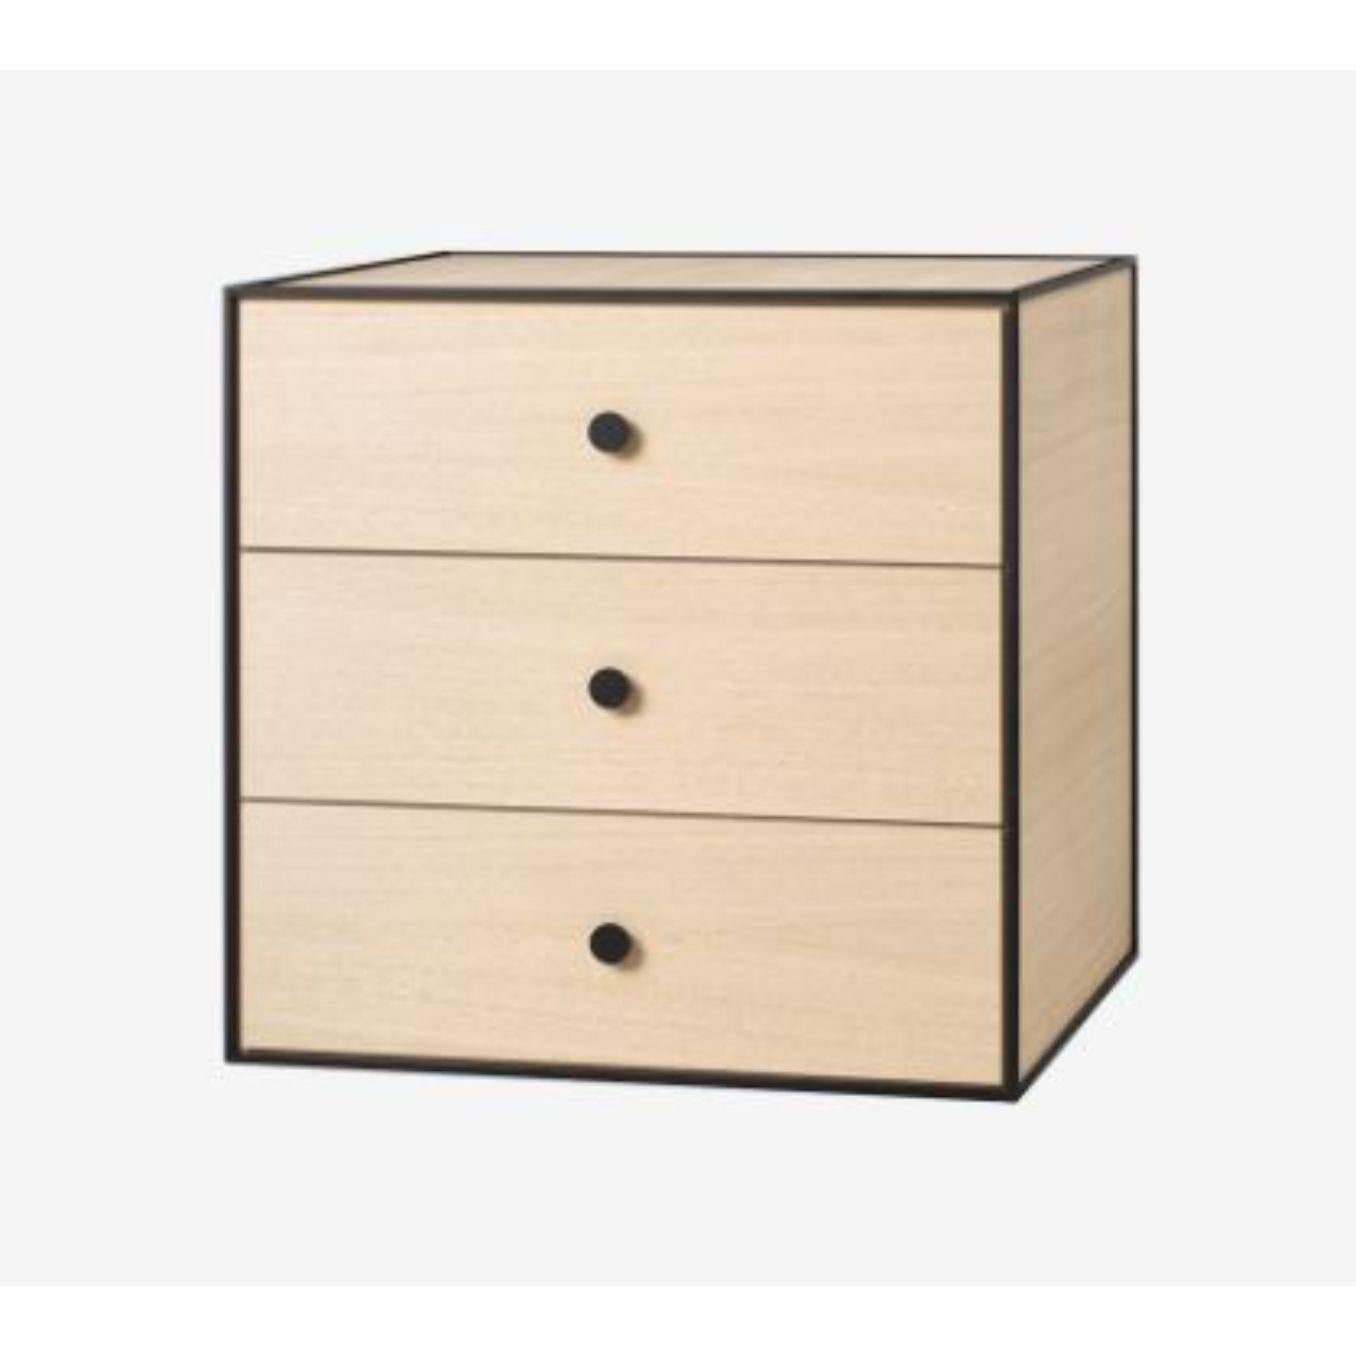 49 oak frame box with 3 drawers by Lassen
Dimensions: D 49 x W 42 x H 49 cm 
Materials: Finér, Melamin, Melamin, Melamine, Metal, Veneer
Also available in different colors and dimensions. 
Weight: 24 Kg


By Lassen is a Danish design brand